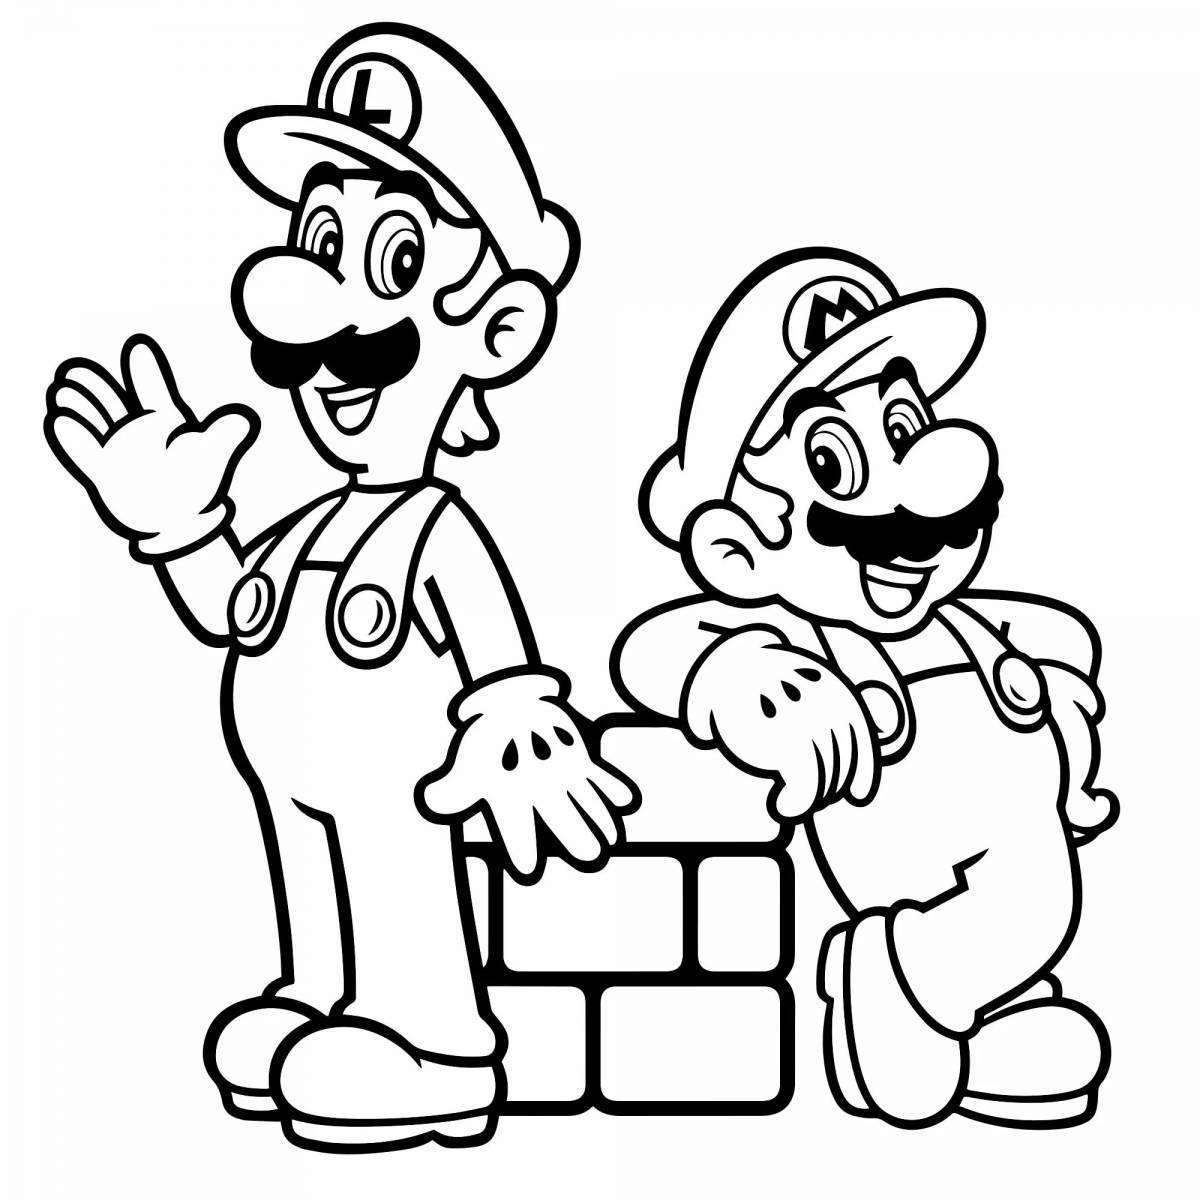 Mario for kids #10